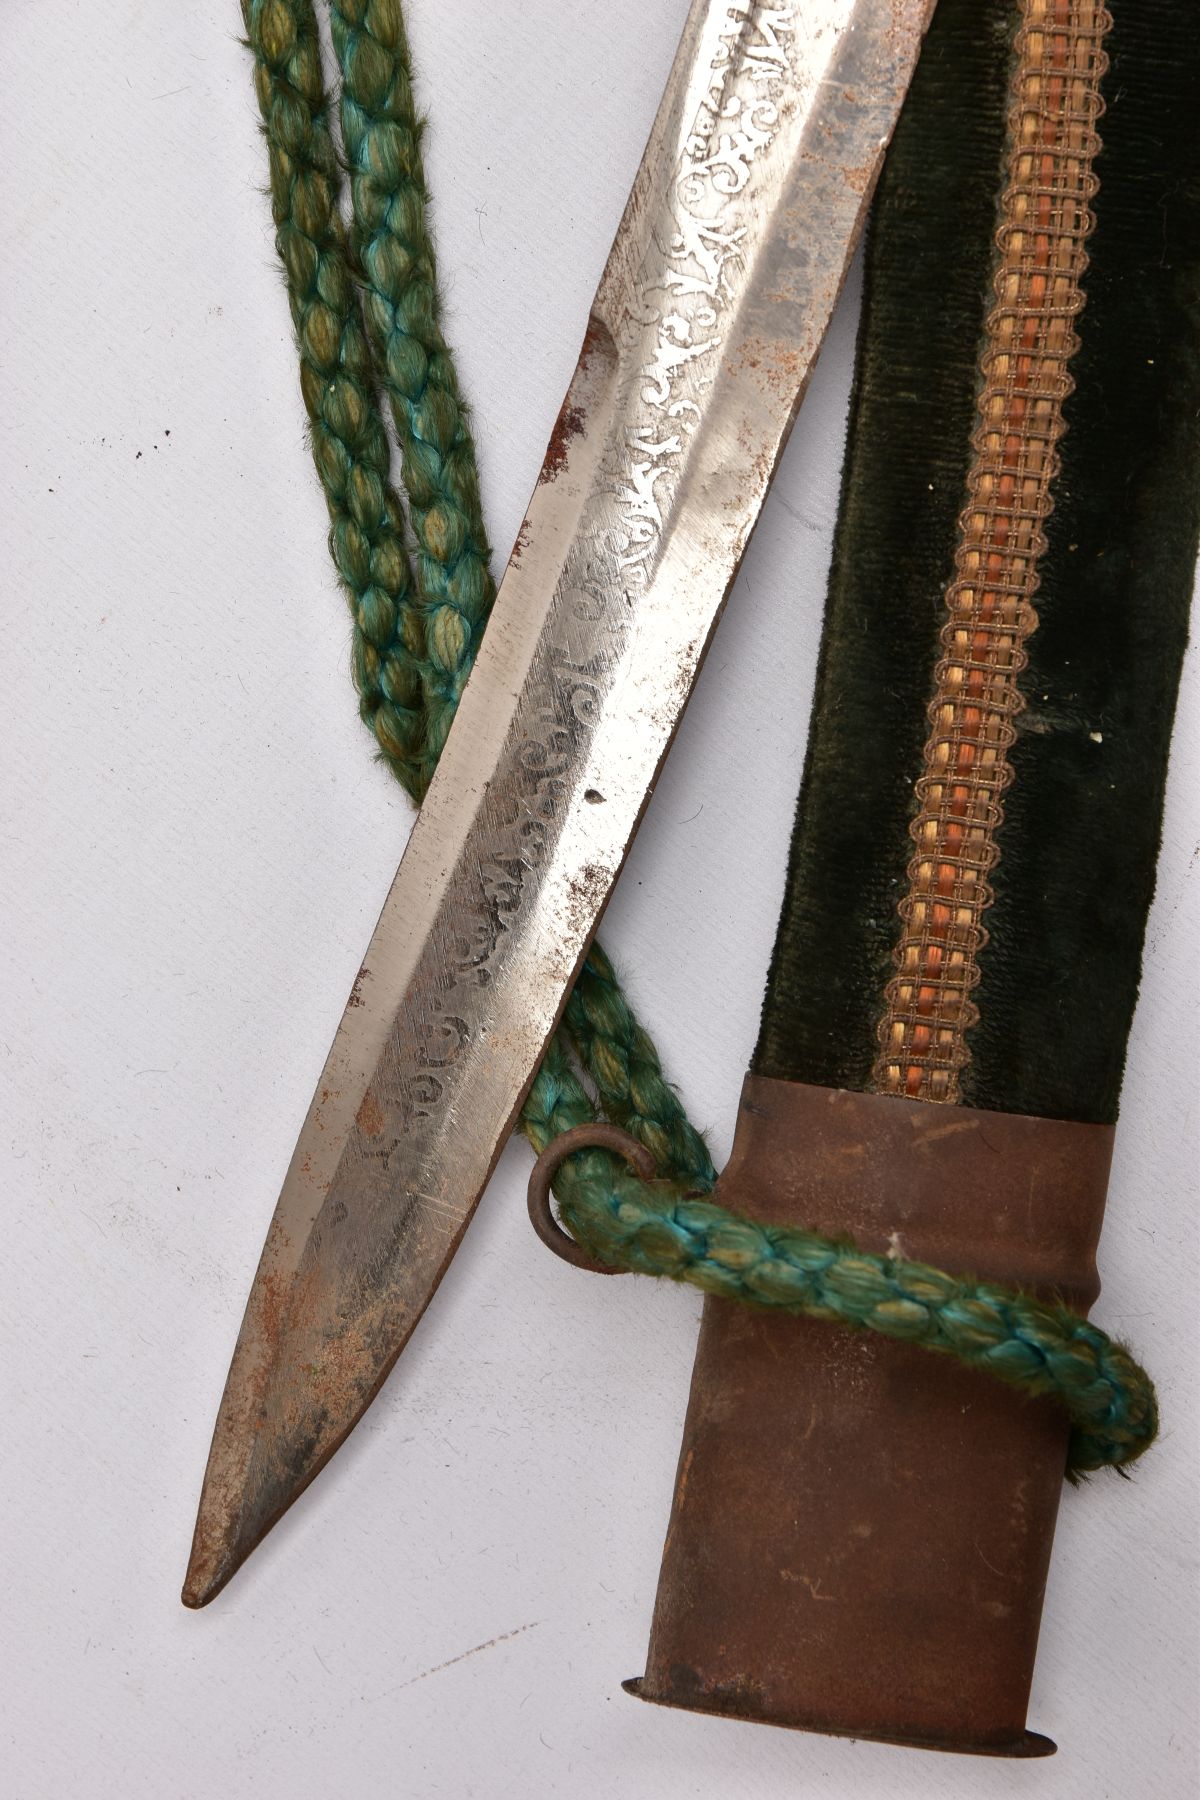 FIVE ASSORTED BLADED WEAPONS, two small short swords, curved blades, poorly constructed, knots in - Image 6 of 14